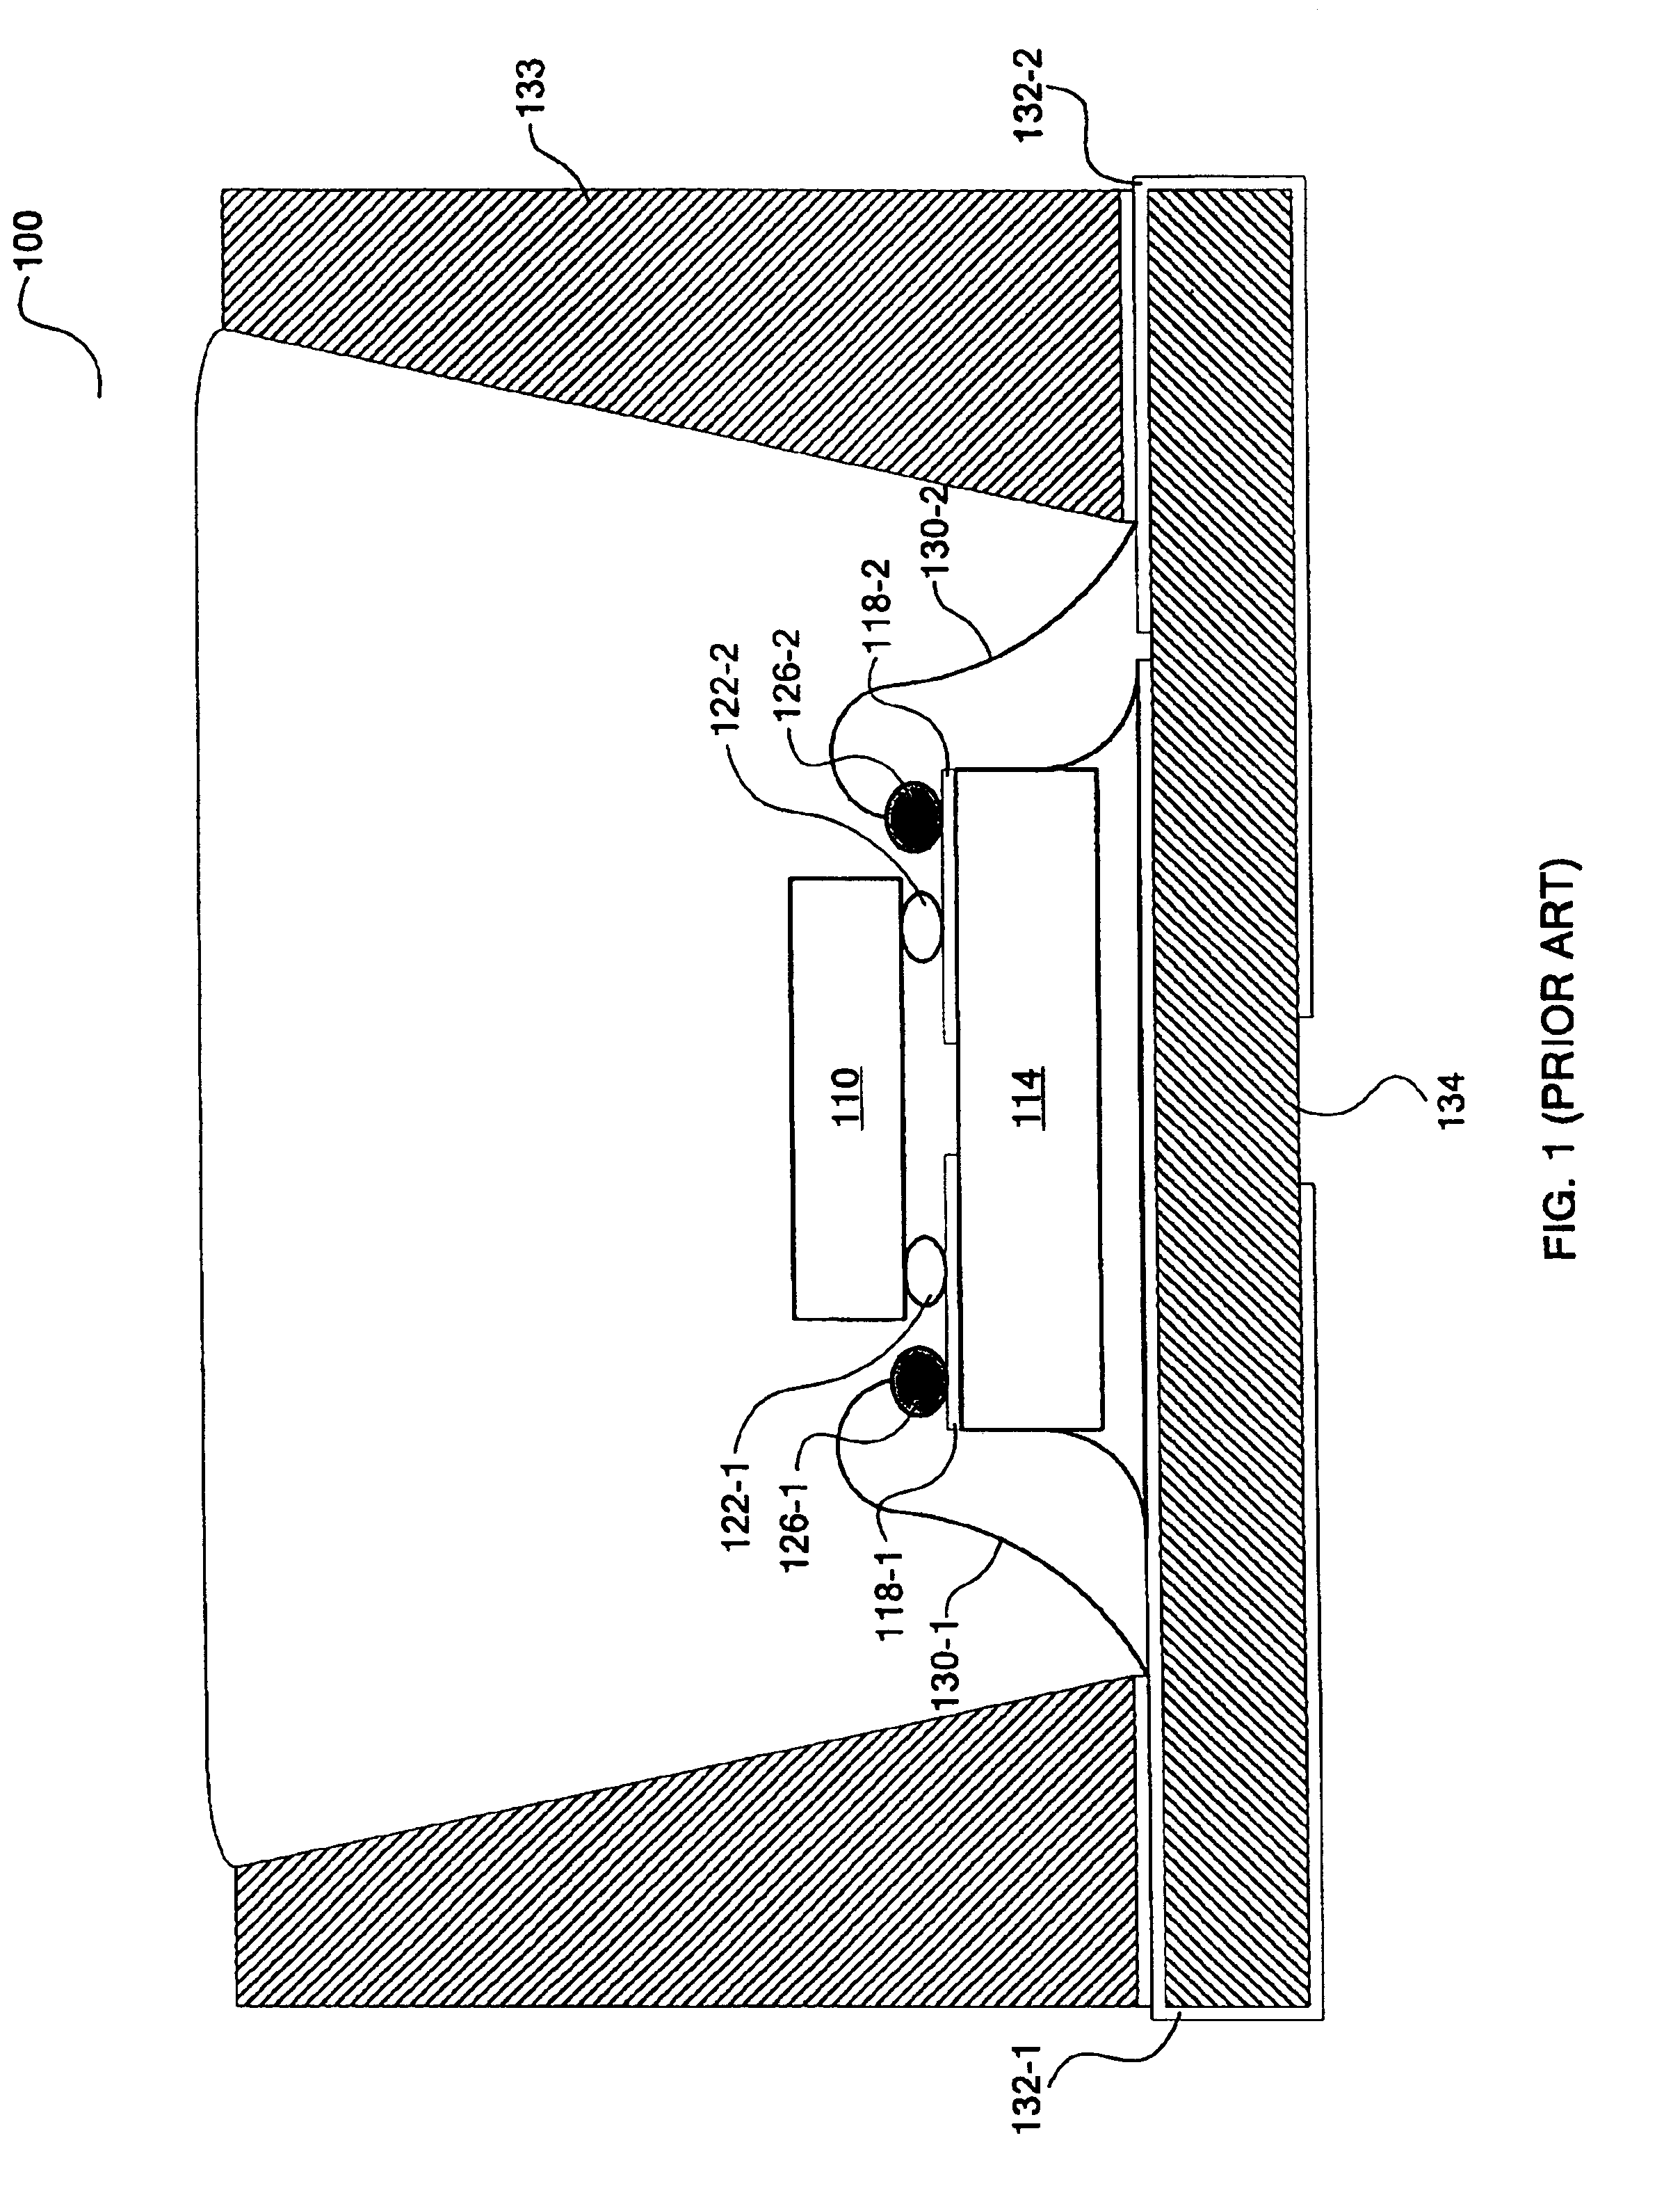 Mount for semiconductor light emitting device